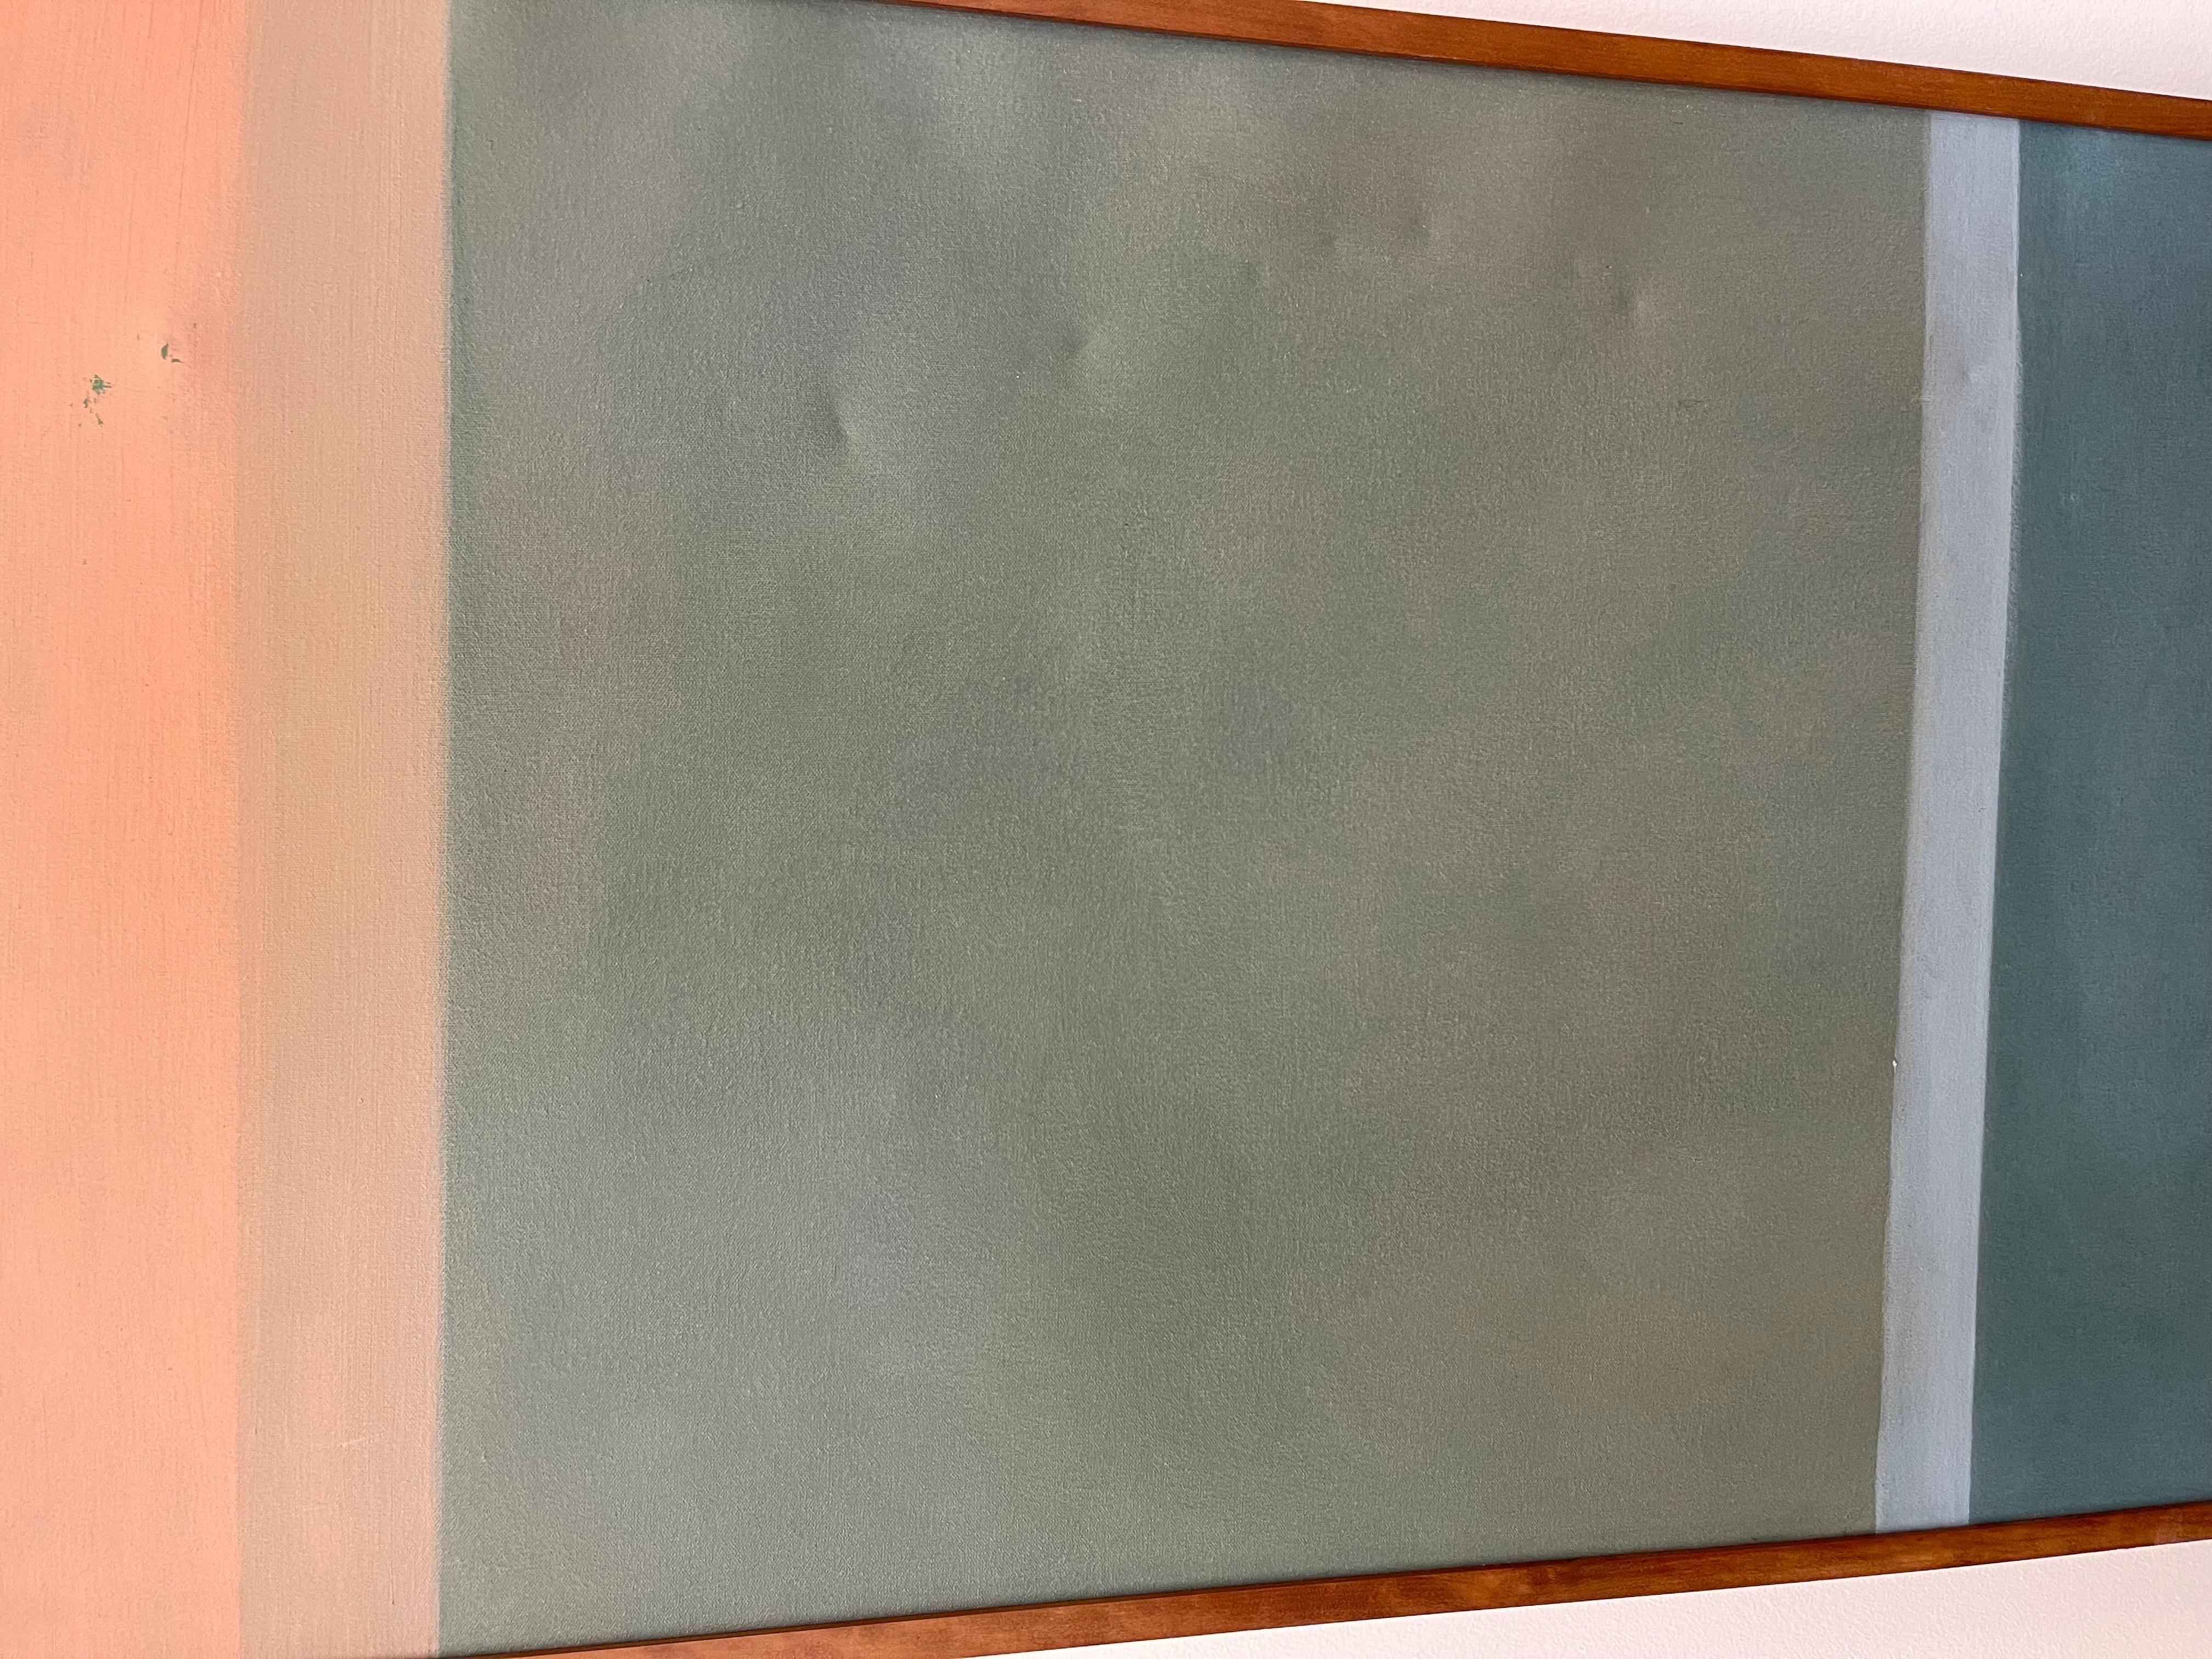 Canvas Original Signed Oil Painting by Anne Hebebrand after Rothko Titled Mossy Green For Sale